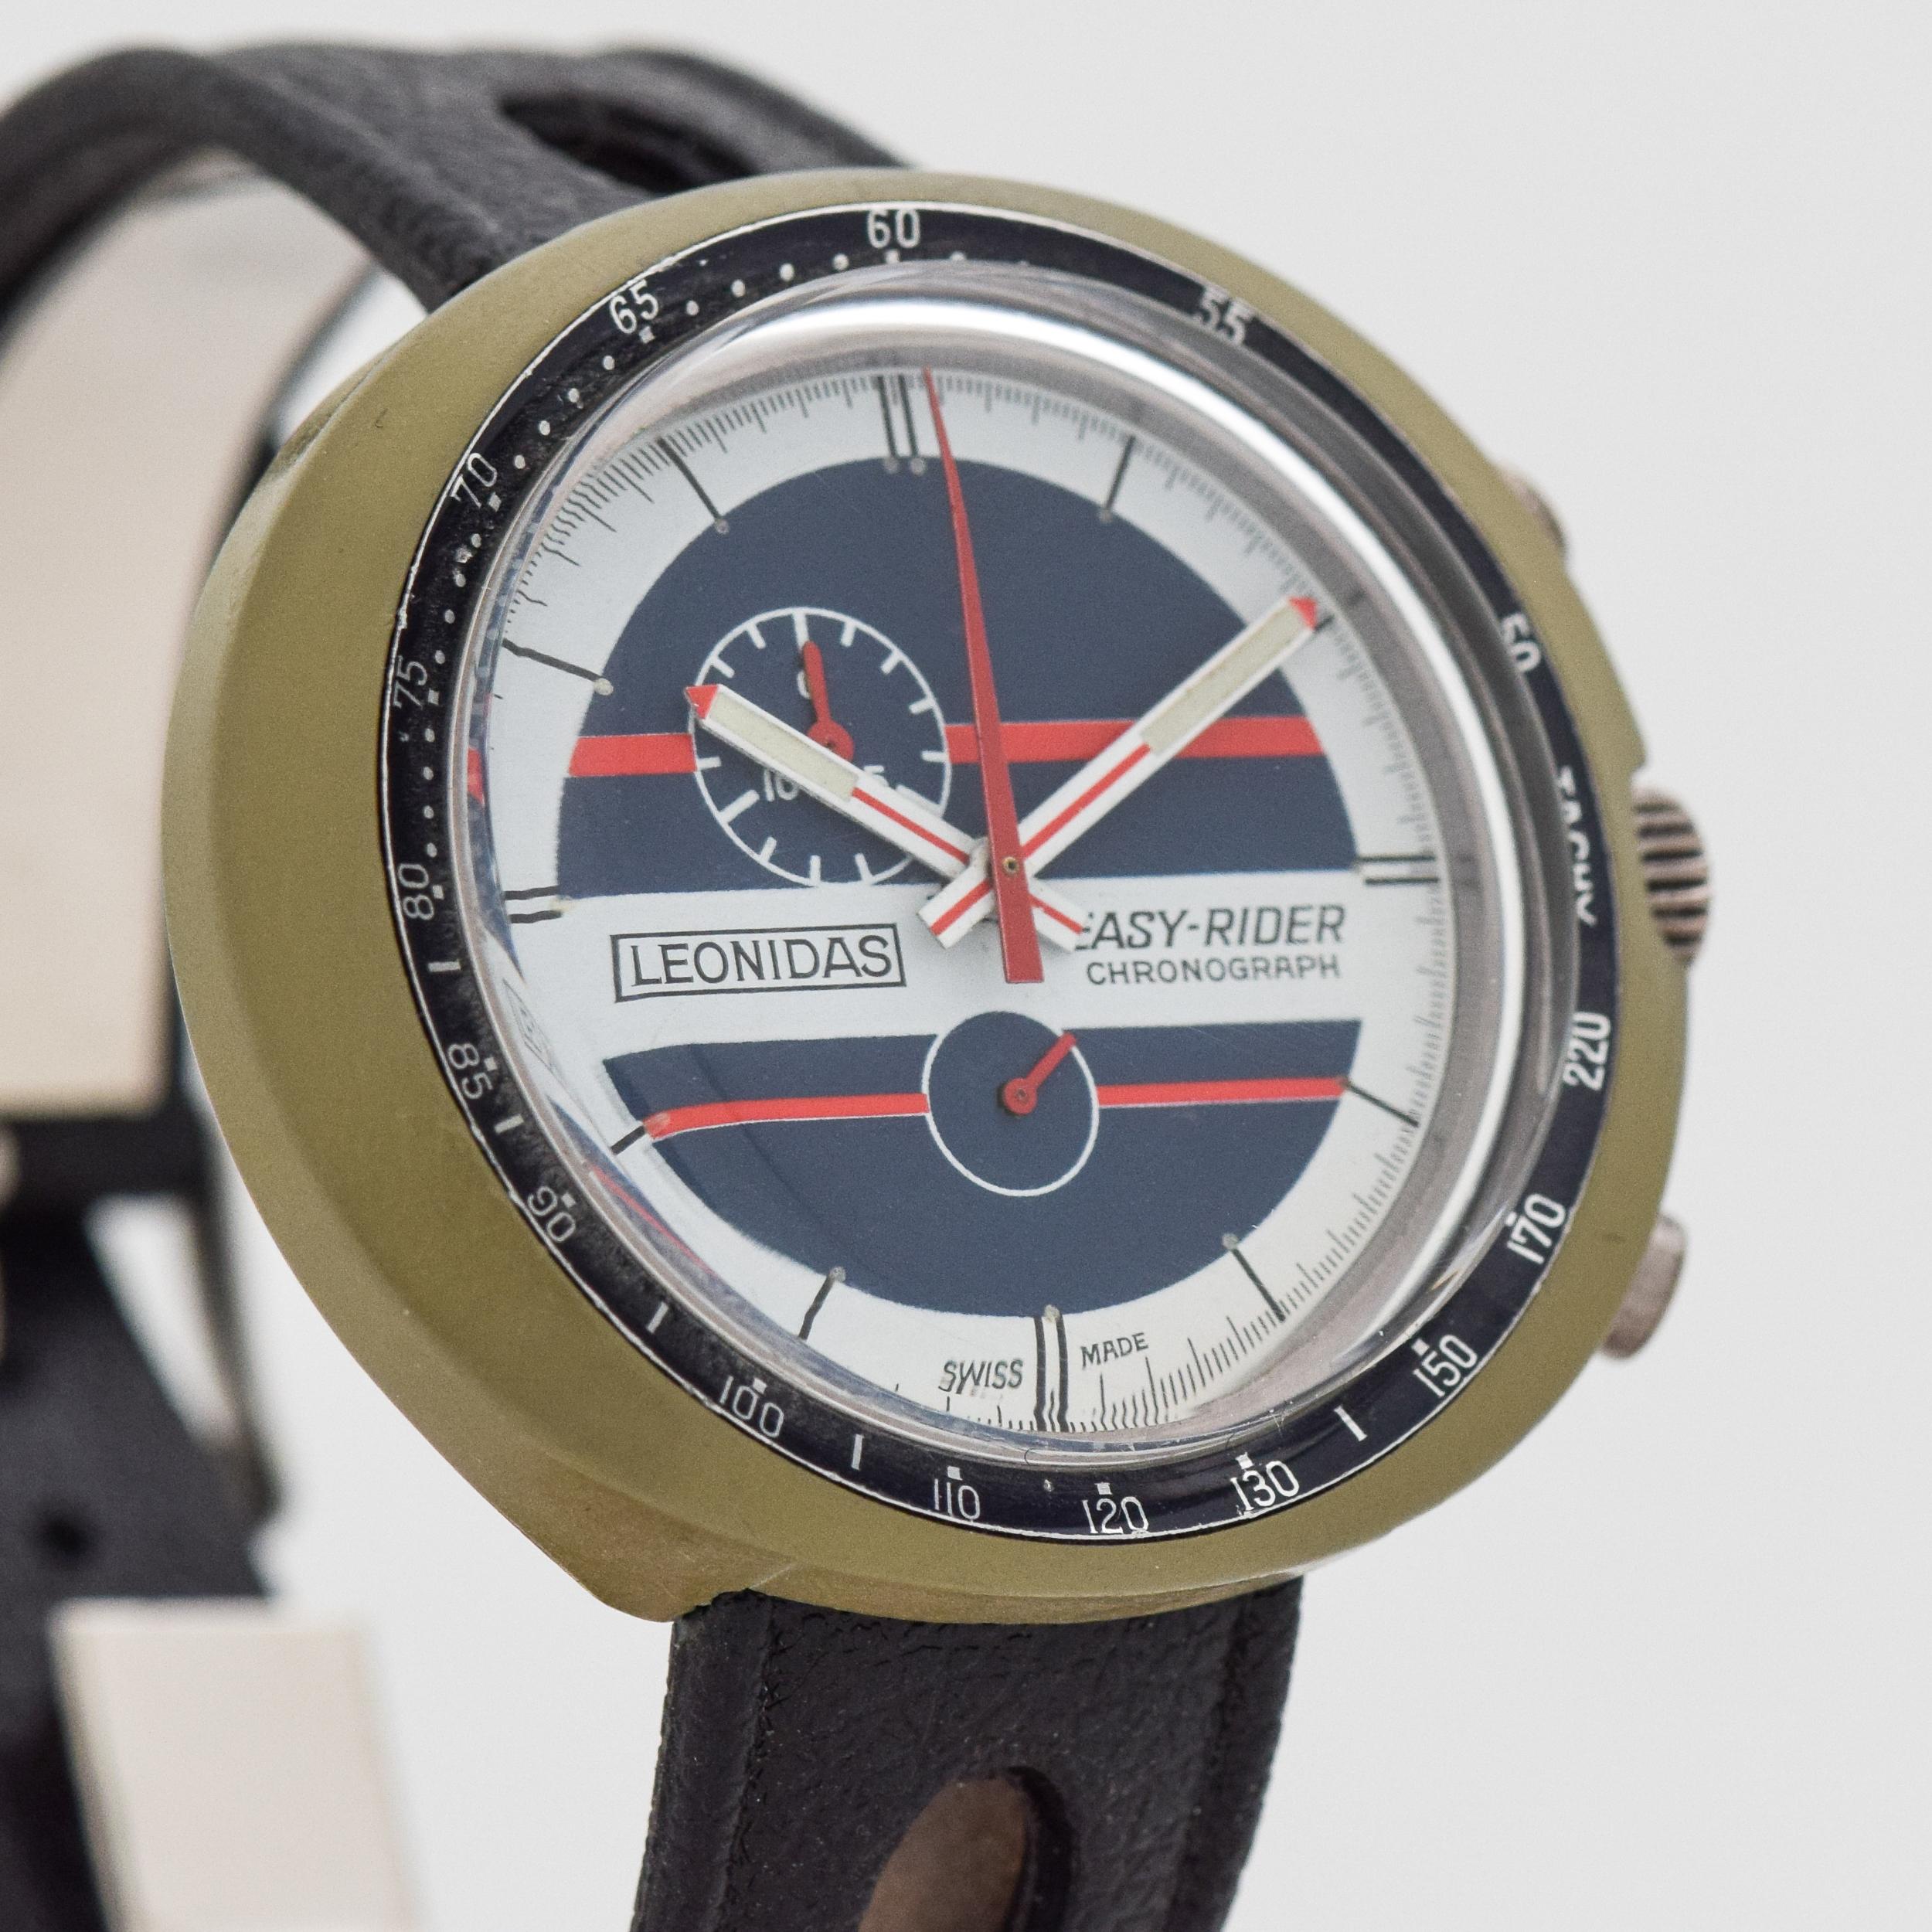 1970's Vintage Leonidas Easy Rider 1 Register Chronograph RARE Plastic Case watch with Original White, Blue, and Red Dial with Original Rubber Strap and Buckle. 45mm x 39mm lug to lug (1.77 in. x 1.54 in.) - 17 jewel, manual caliber movement. Triple